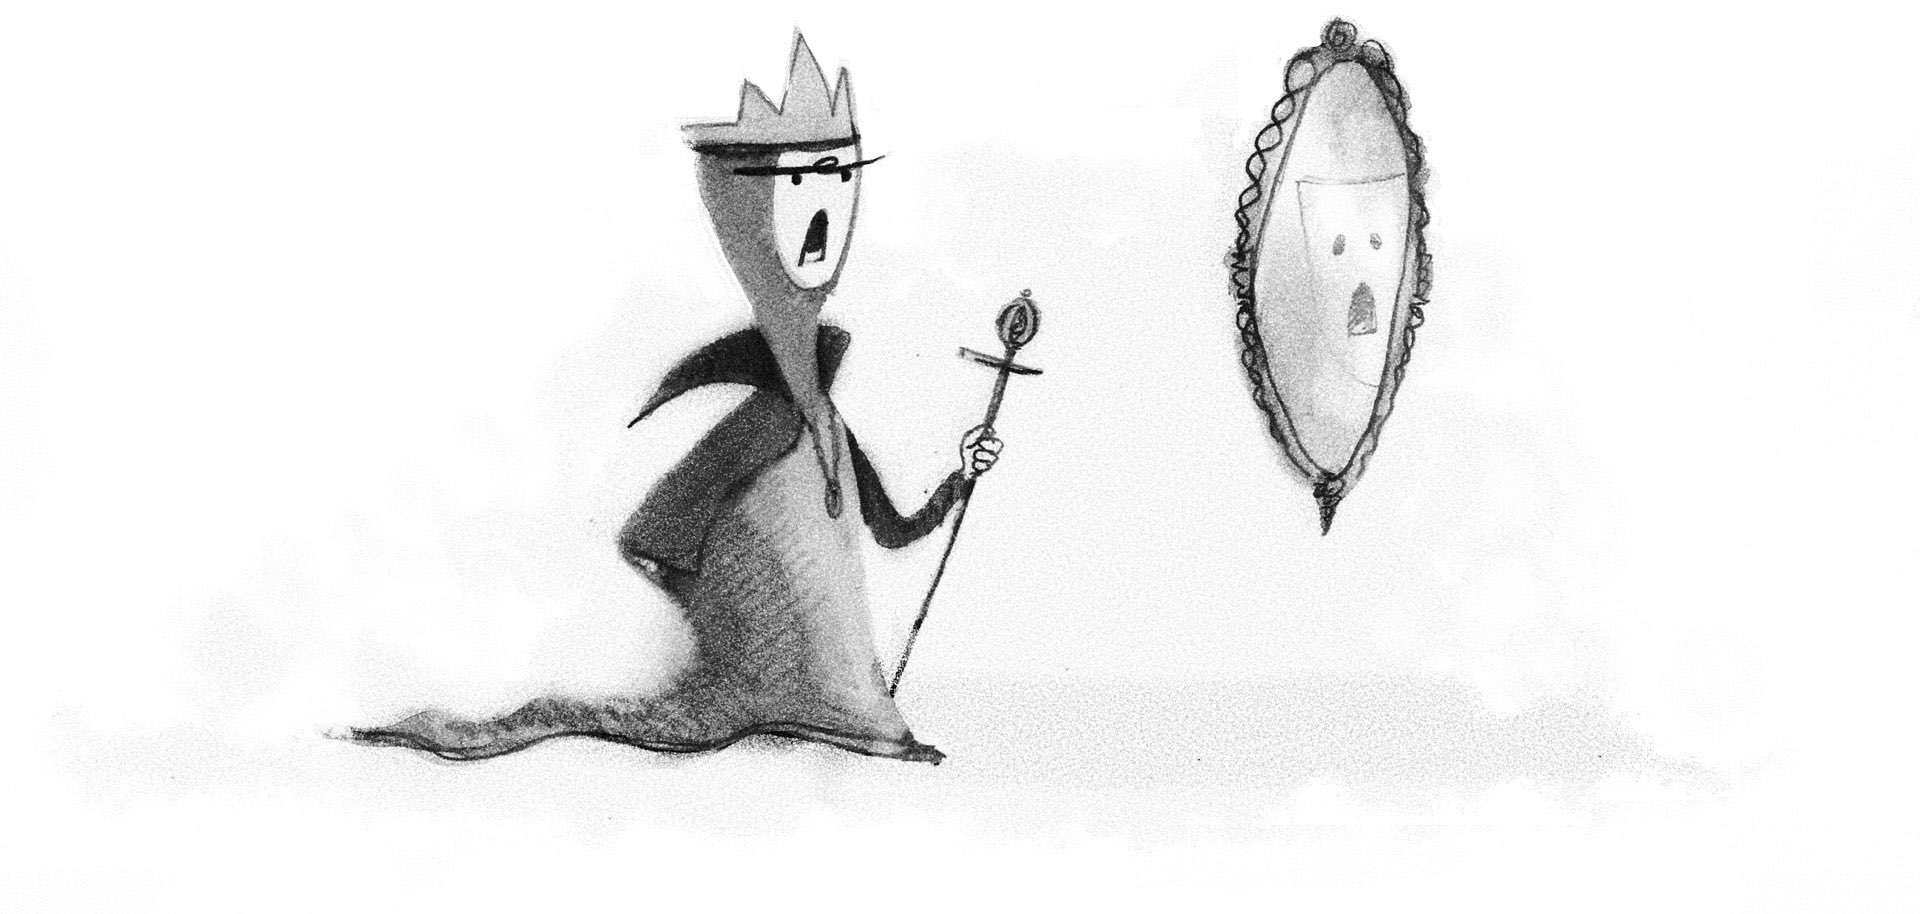 Illustration: The evil queen consults her magic mirror, who gives answers just for her.